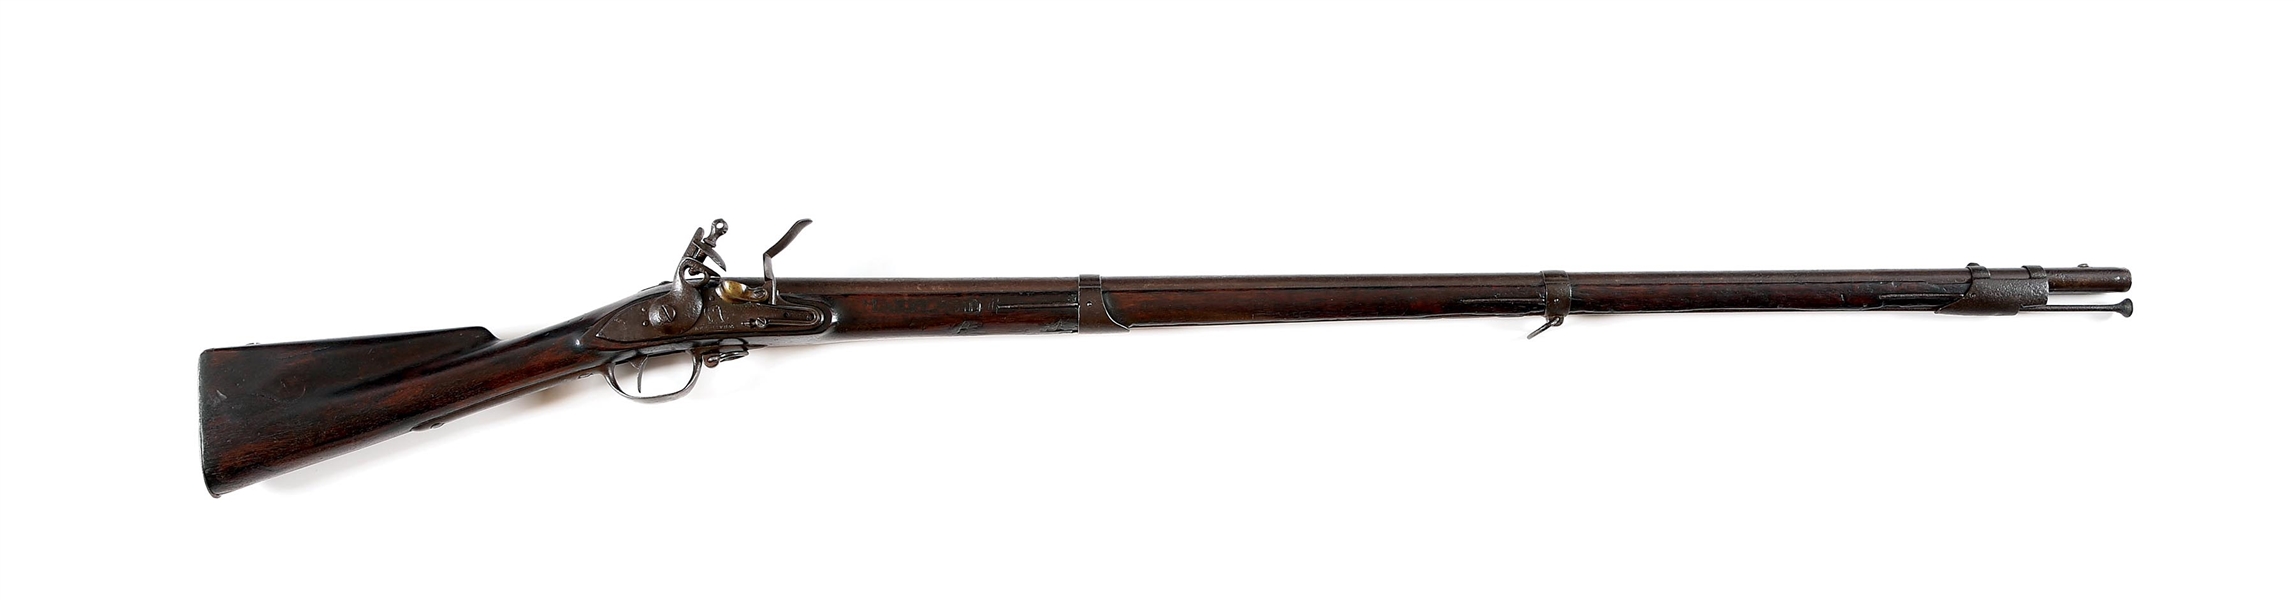 (A) MARYLAND BRANDED US MODEL 1798 CONTRACT FLINTLOCK MUSKET BY ELI WHITNEY.